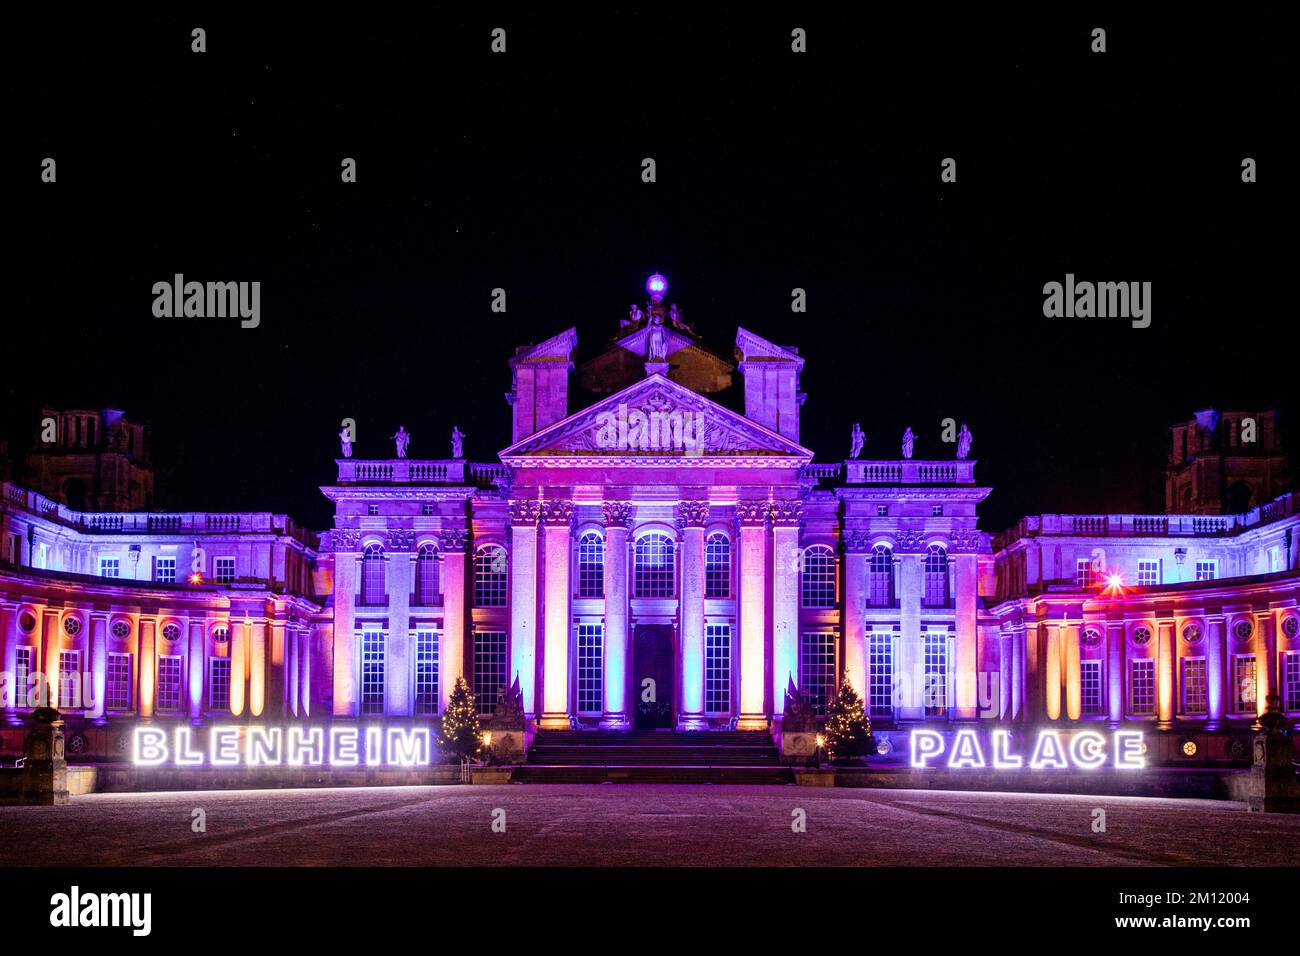 The palace at Blenheim illuminated with Christmas and winter lights. Stock Photo